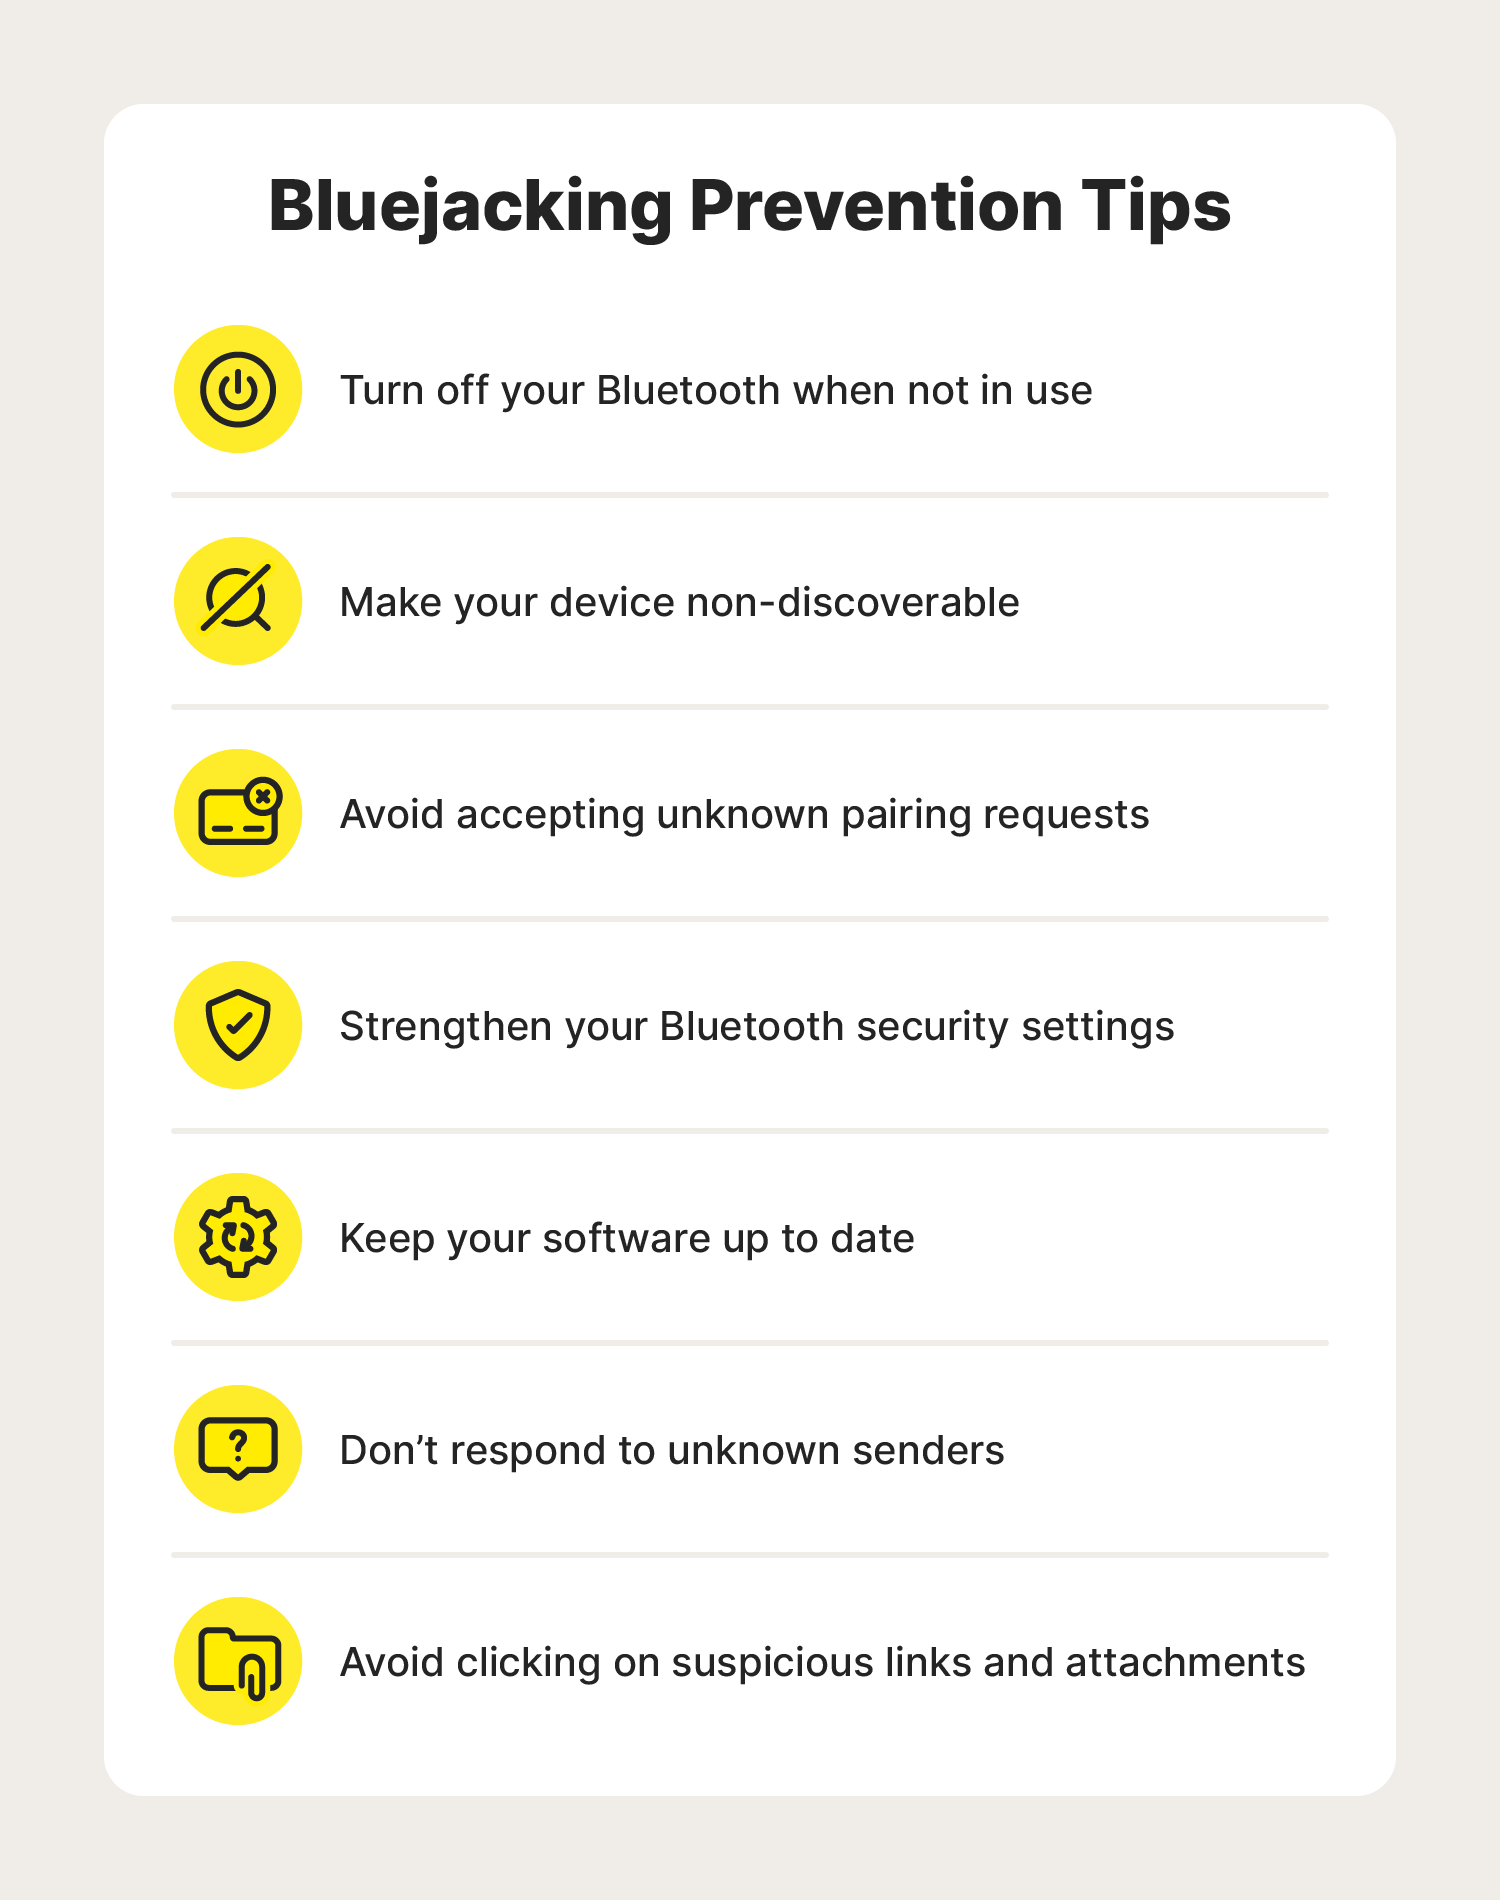 A graphic highlights protection tips that can help reduce the risk of bluejacking.